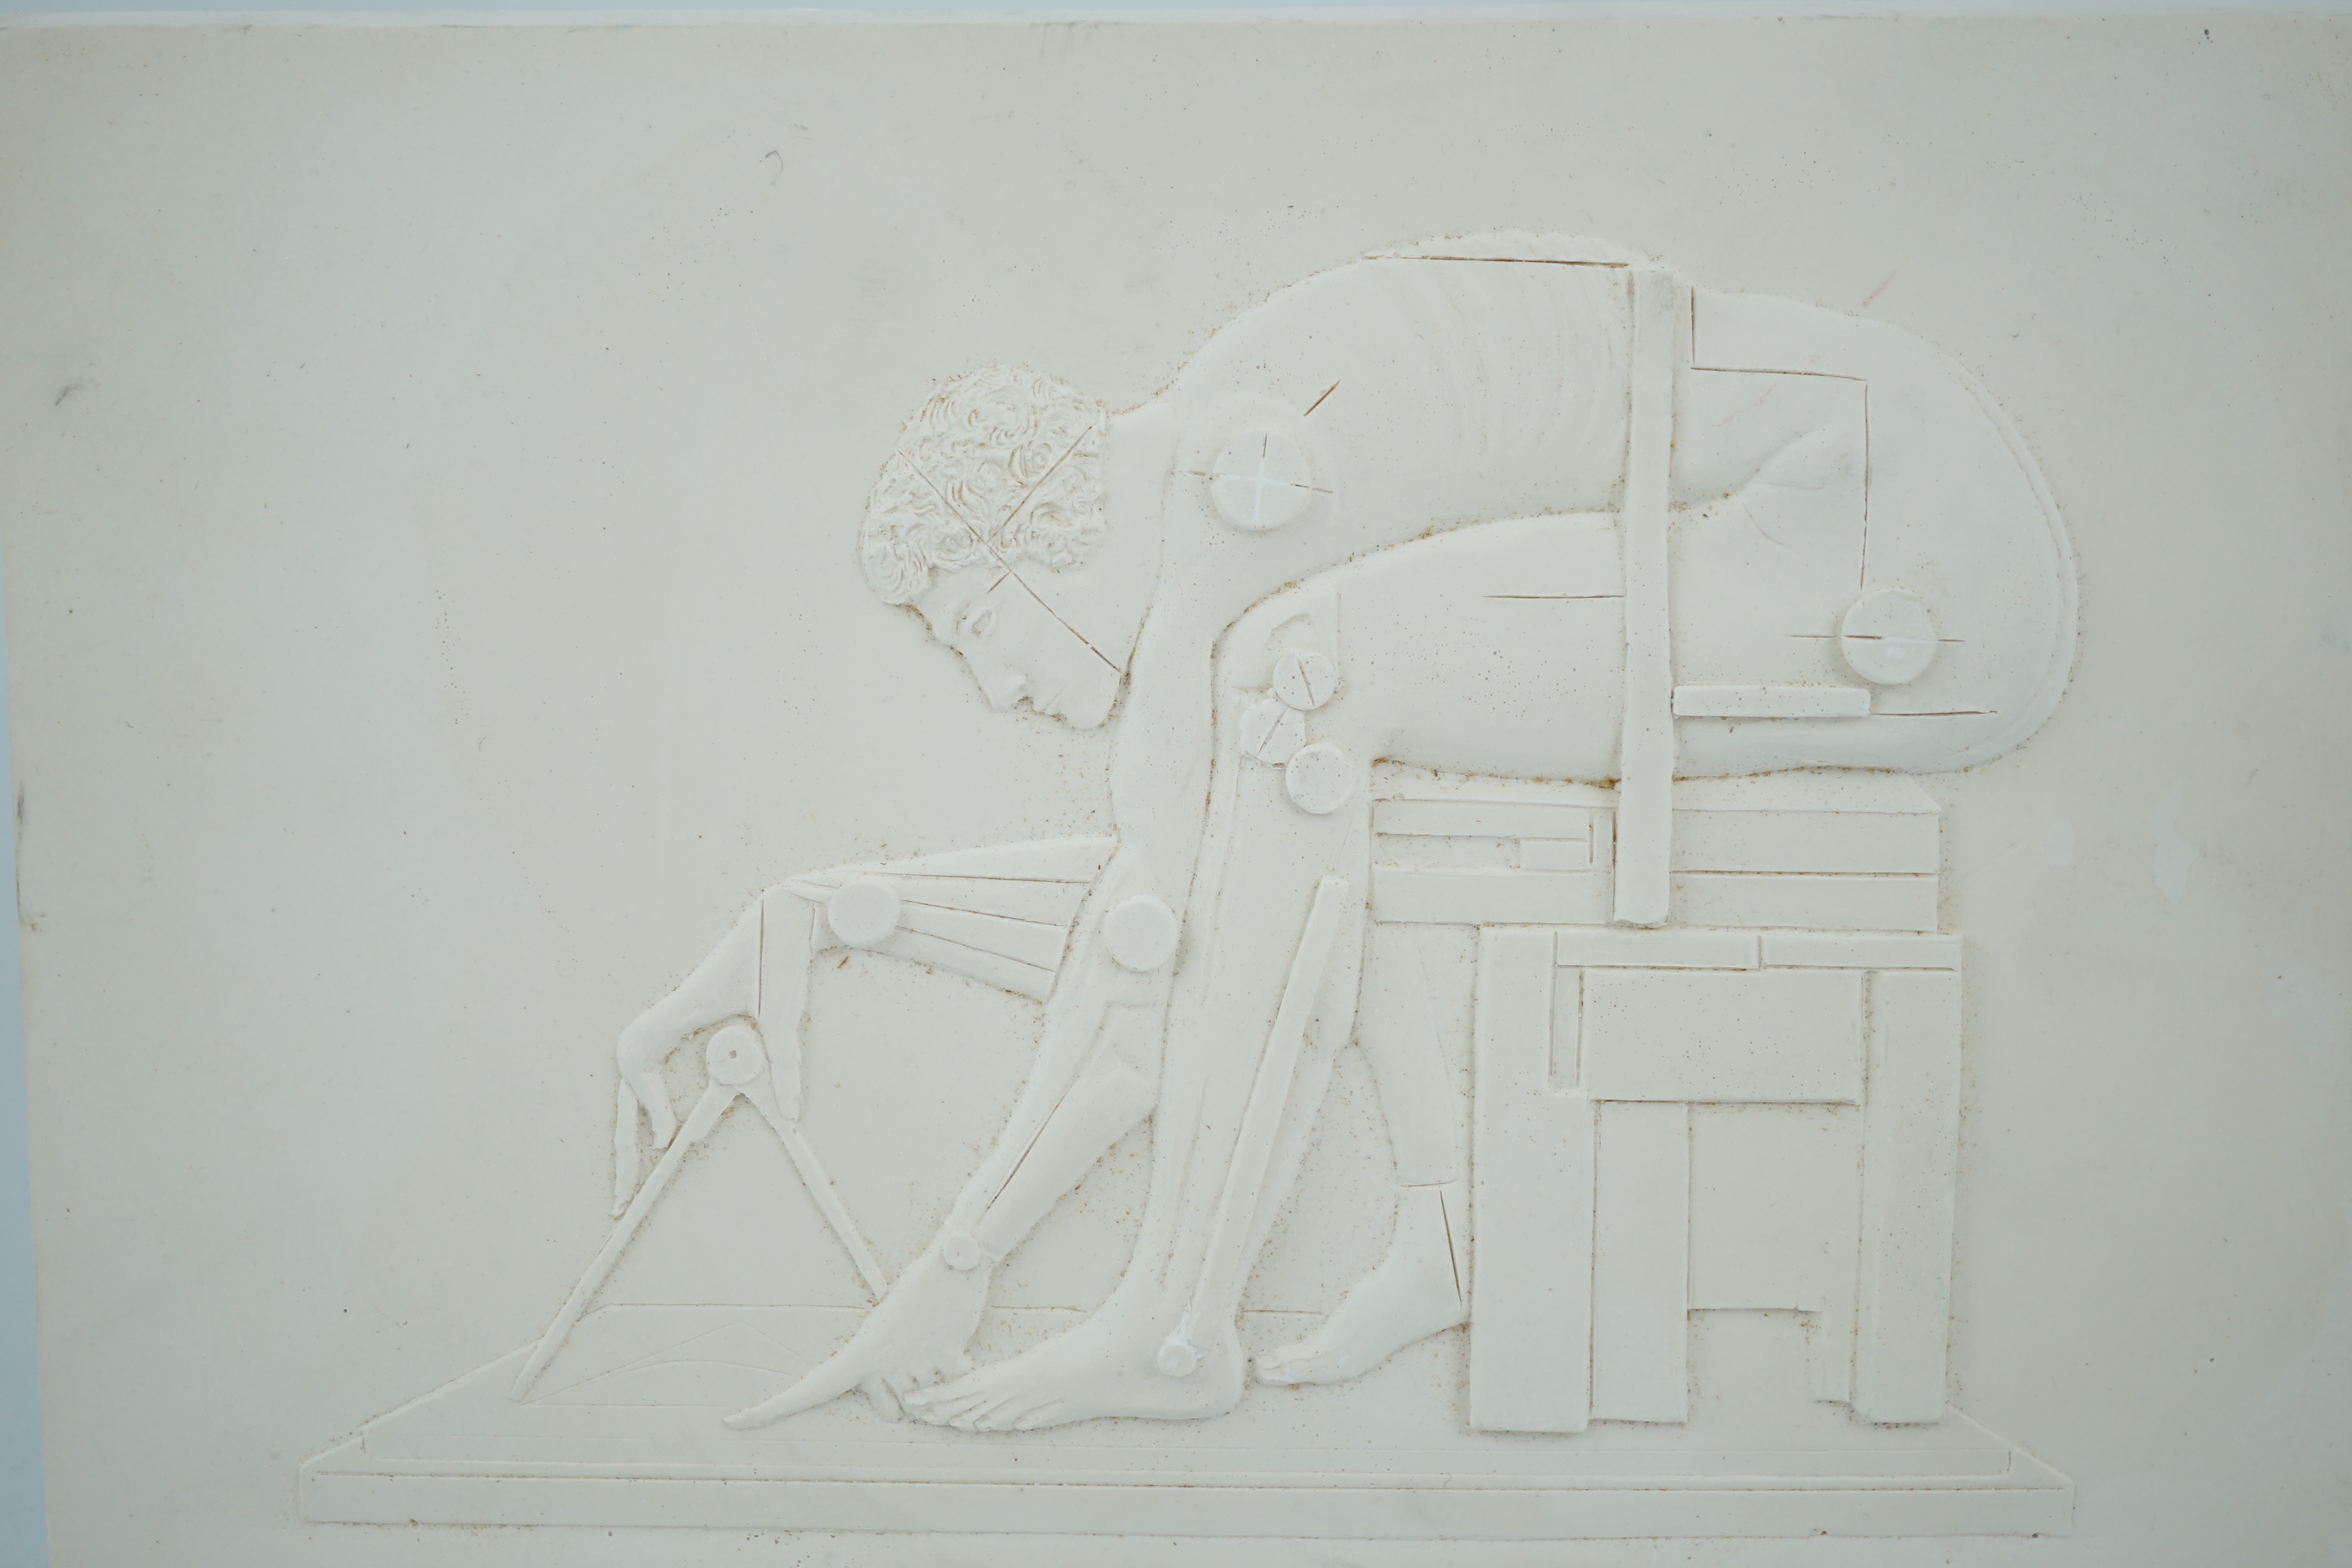 Sir Eduardo Paolozzi (British, 1924-2005), Newton (After Blake), 1994 (Study for the British Library), plaster relief, 15 x 21cm